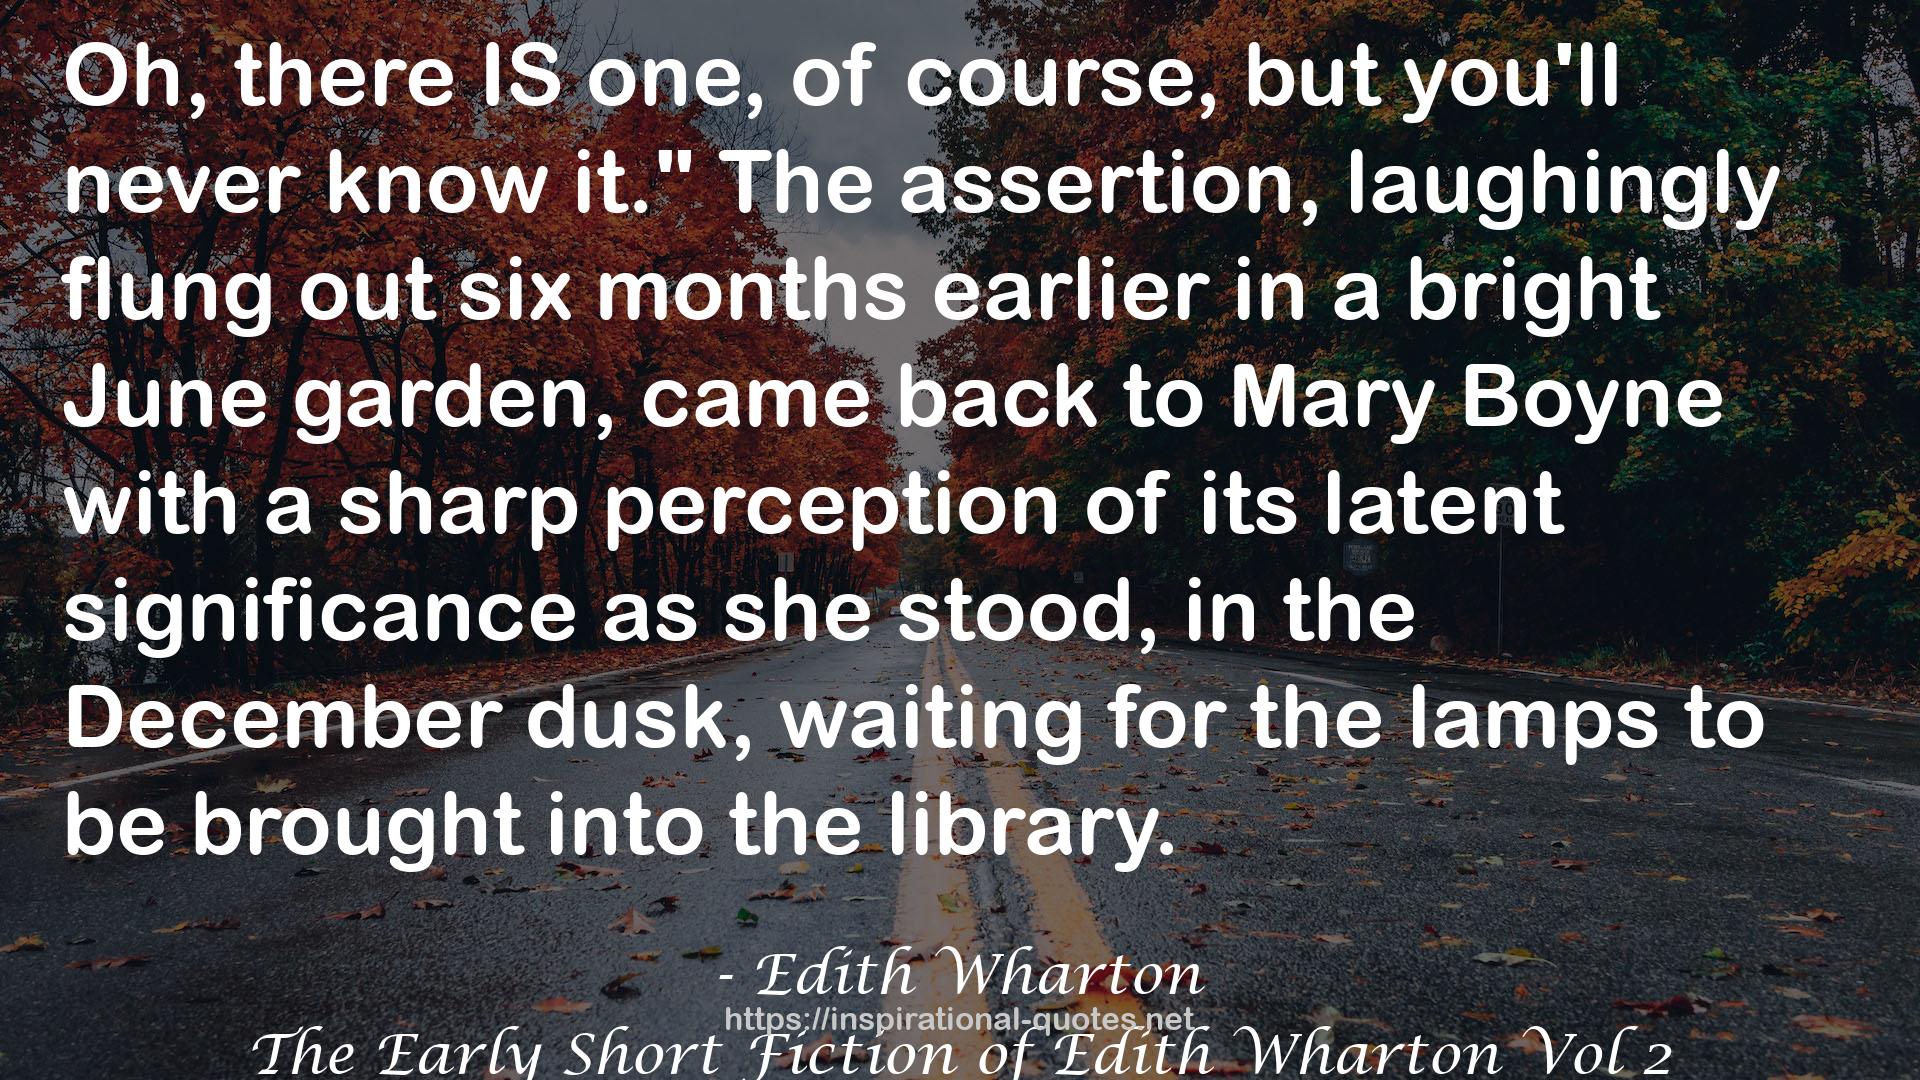 The Early Short Fiction of Edith Wharton Vol 2 QUOTES